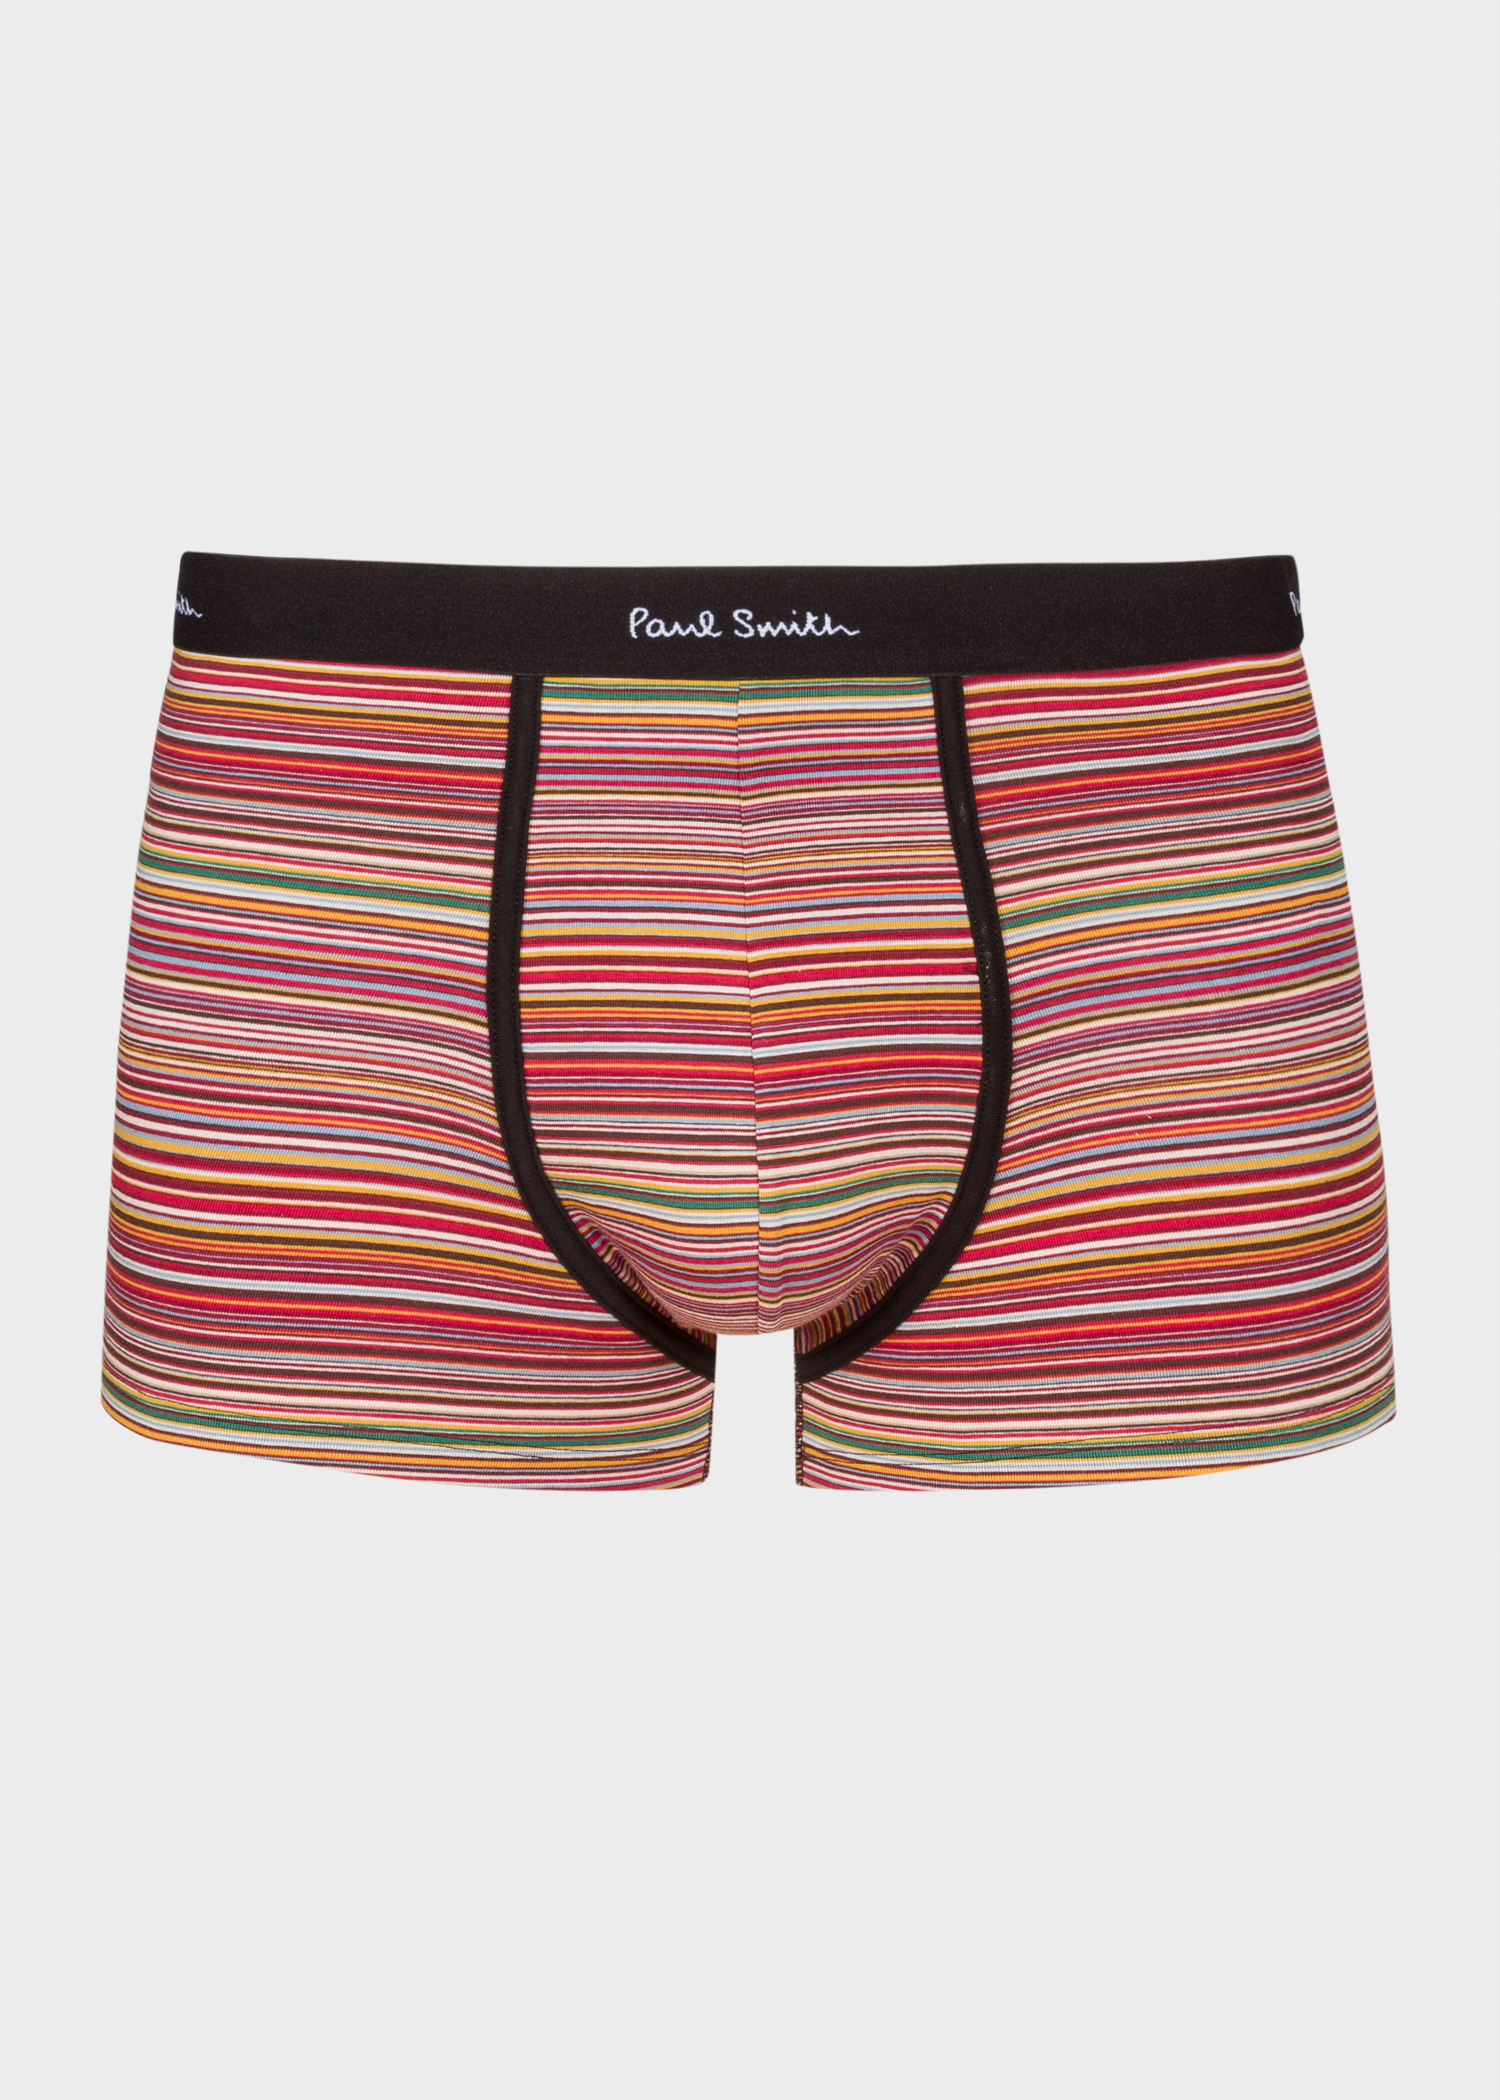 Boxer Brief Front view - Men's Black Mixed Stripe Boxer Briefs Three Pack Paul Smith